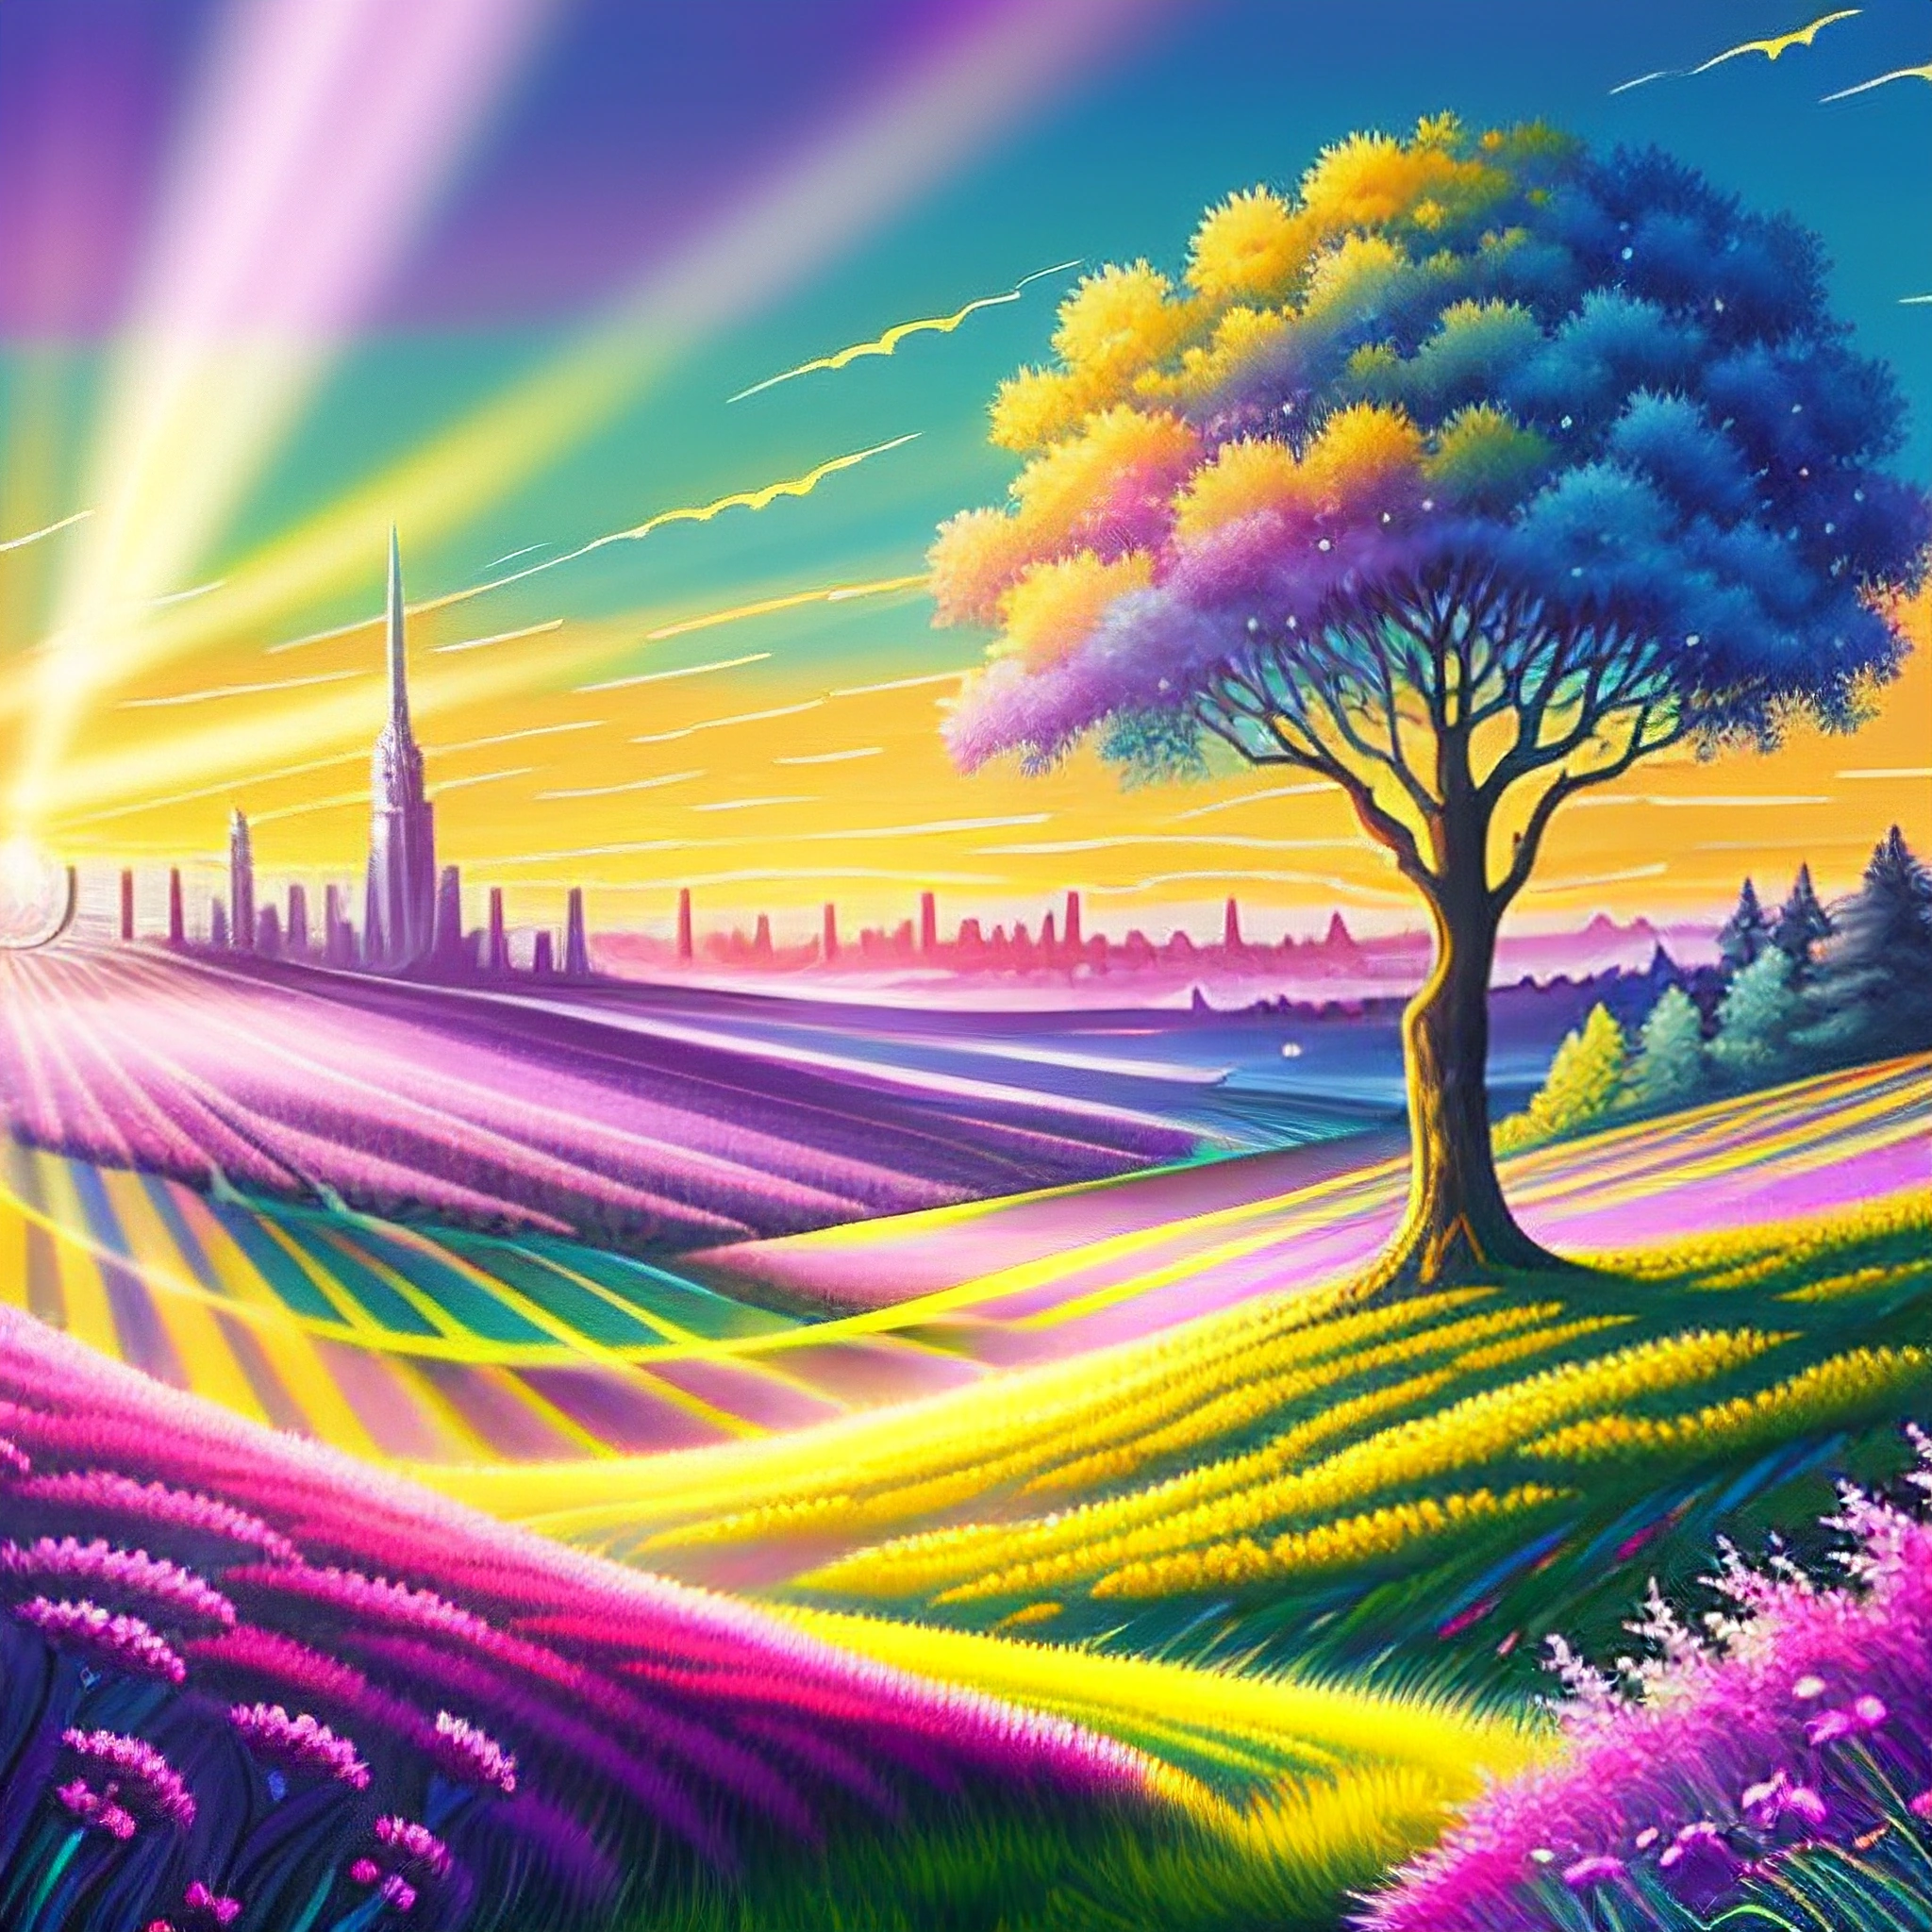 a painting of a colorful landscape with a tree and a sunset